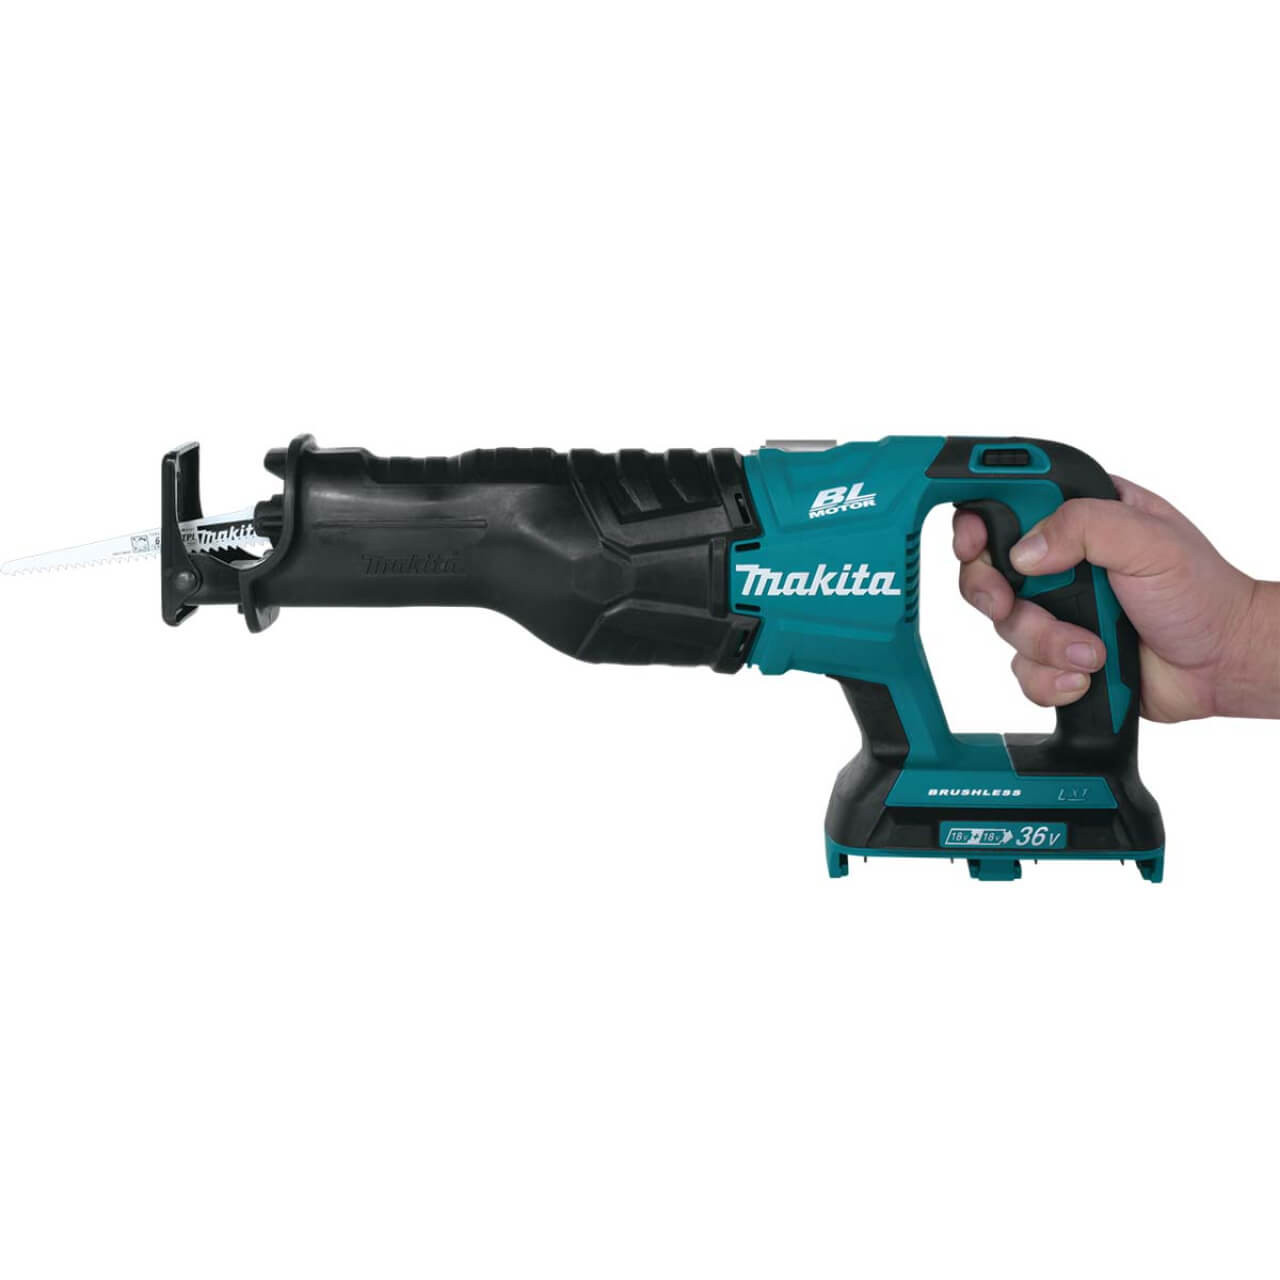 Makita 18Vx2 BRUSHLESS Recipro Saw - Tool Only